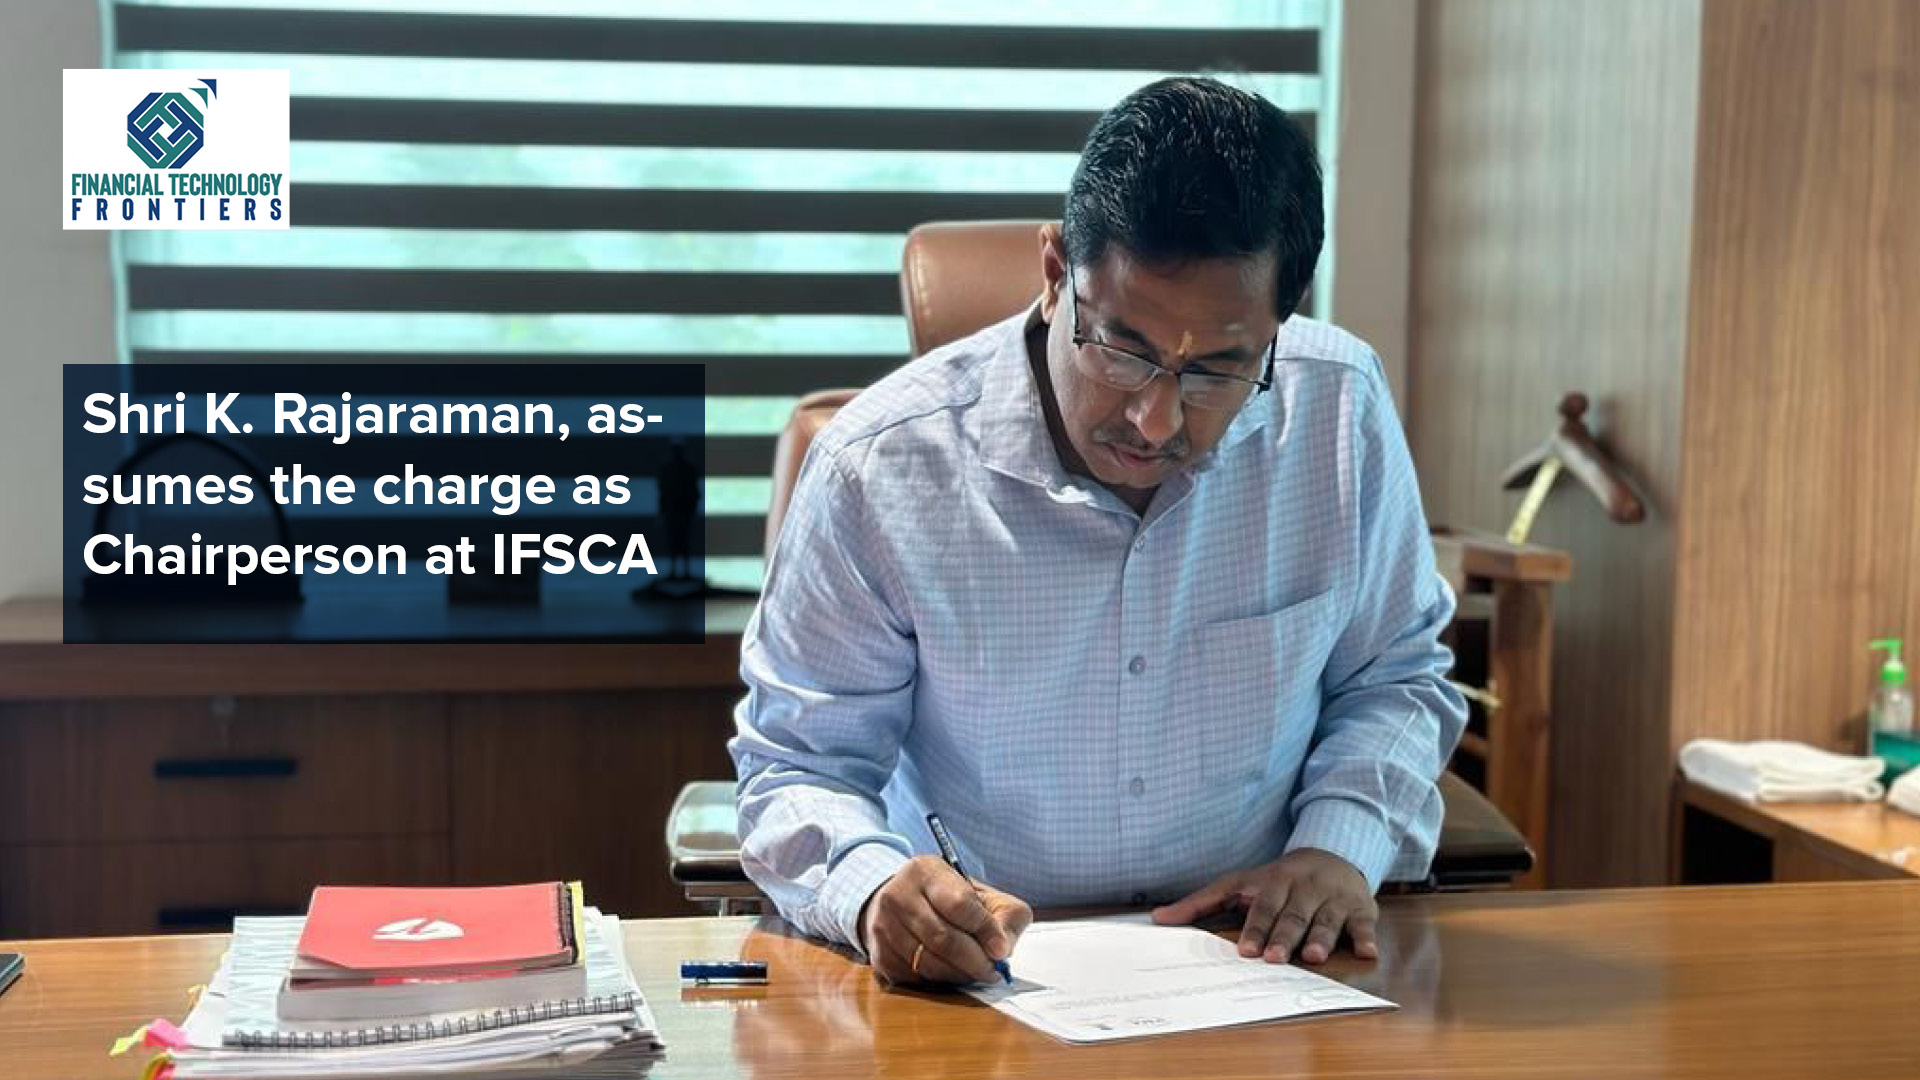 Shri K. Rajaraman, assumes the charge as Chairperson at IFSCA